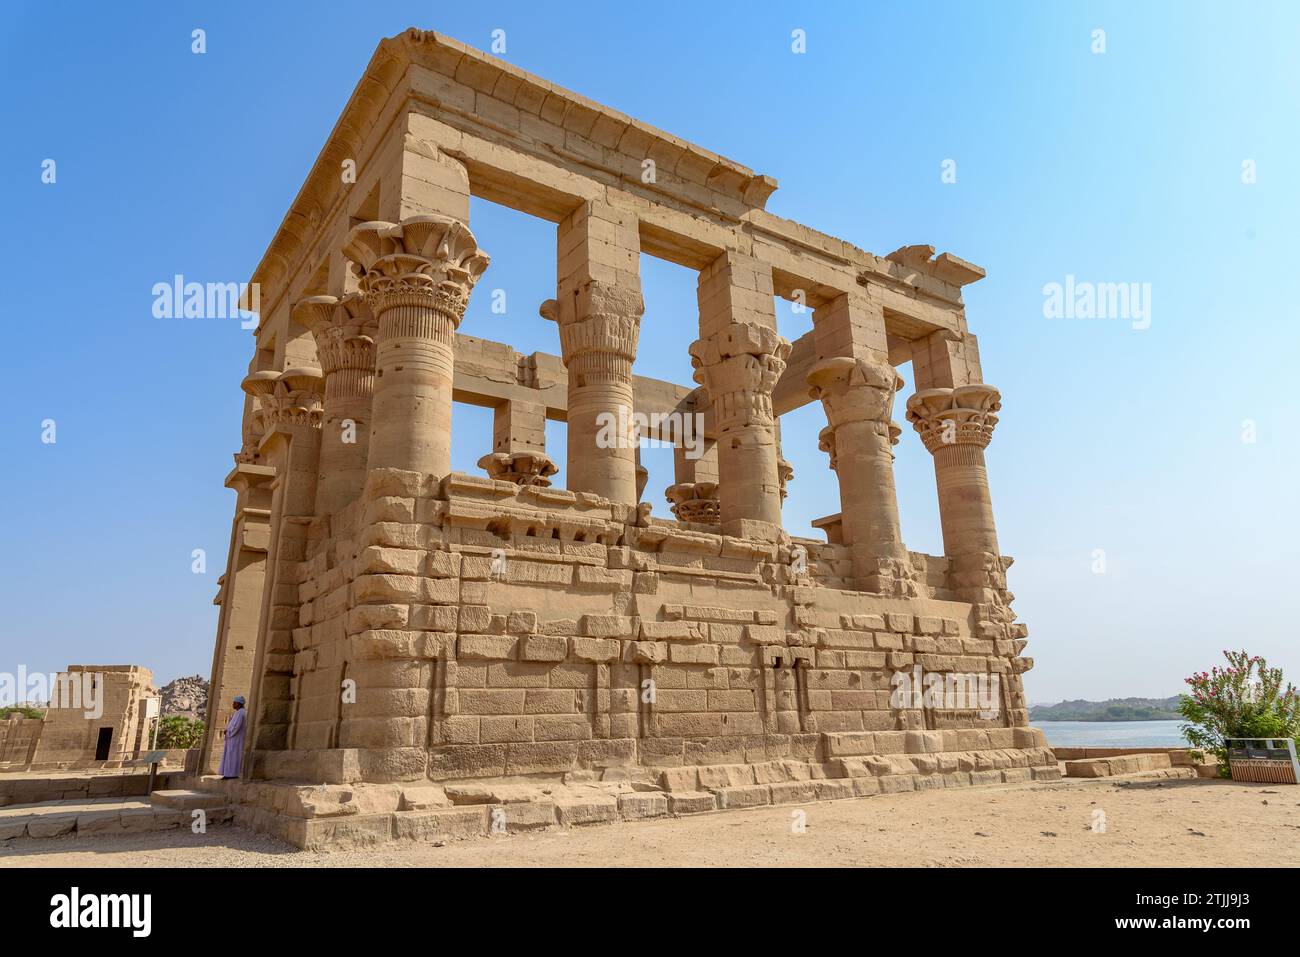 Trajan's Kiosk, also known as Pharaoh's Bed by the locals, is a hypaethral temple currently located on Agilkia Island in southern Egypt. The unfinished monument is attributed to Trajan, Roman emperor from 98 to 117 AD, due to his depiction as pharaoh seen on some of the interior reliefs. Asw‰n Reservoir Colony, Aswan, Egypt. Stock Photo